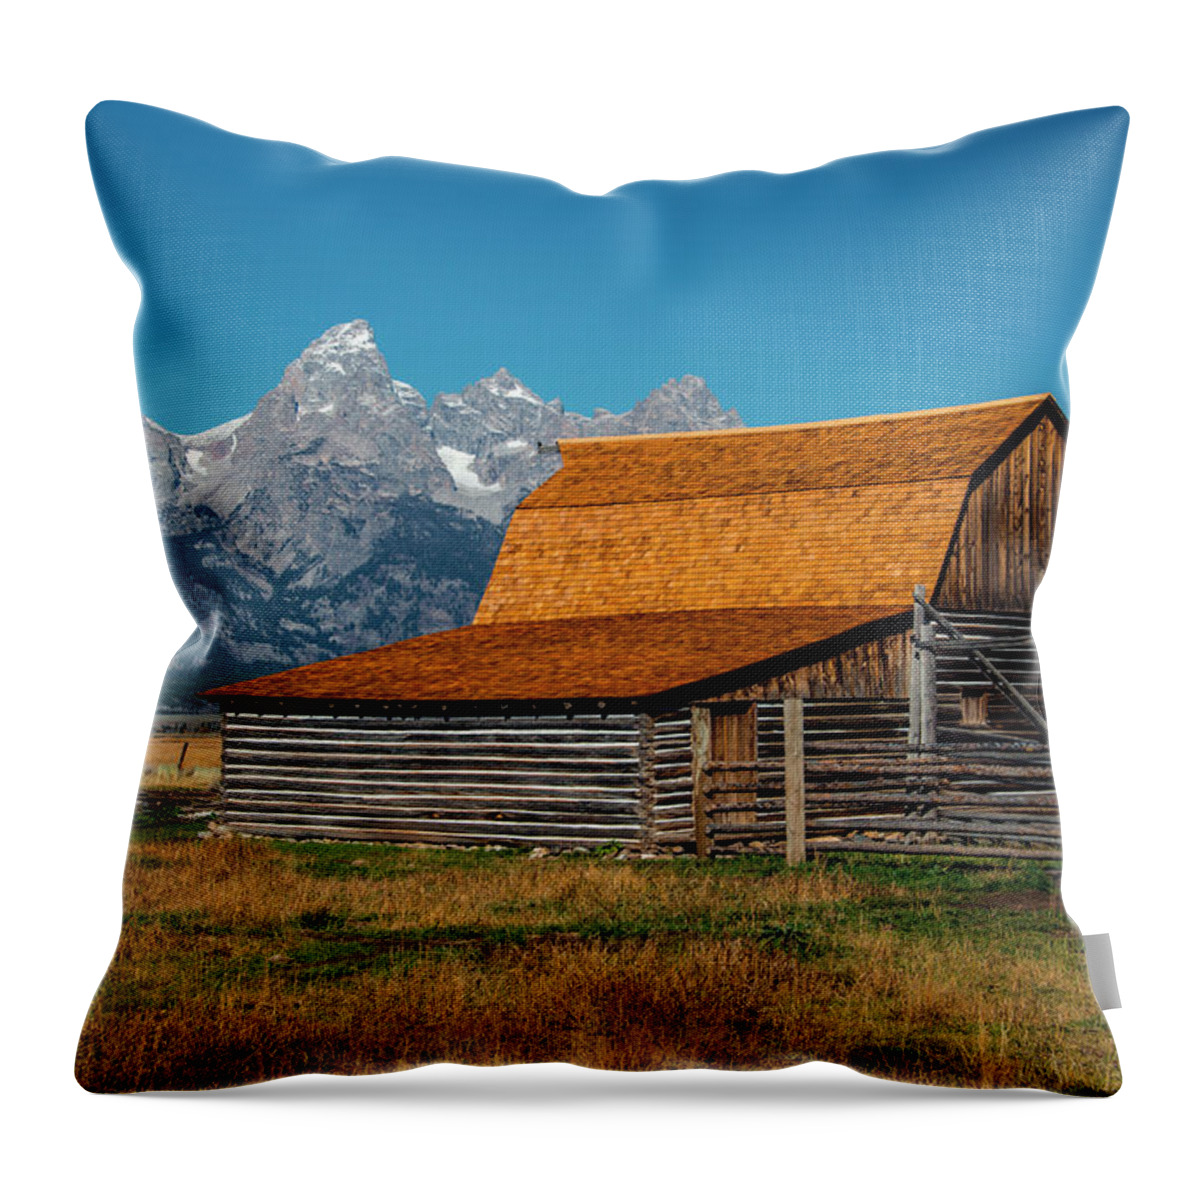 Grand Tetons Throw Pillow featuring the photograph Mormons Barn 3779 by Donald Brown